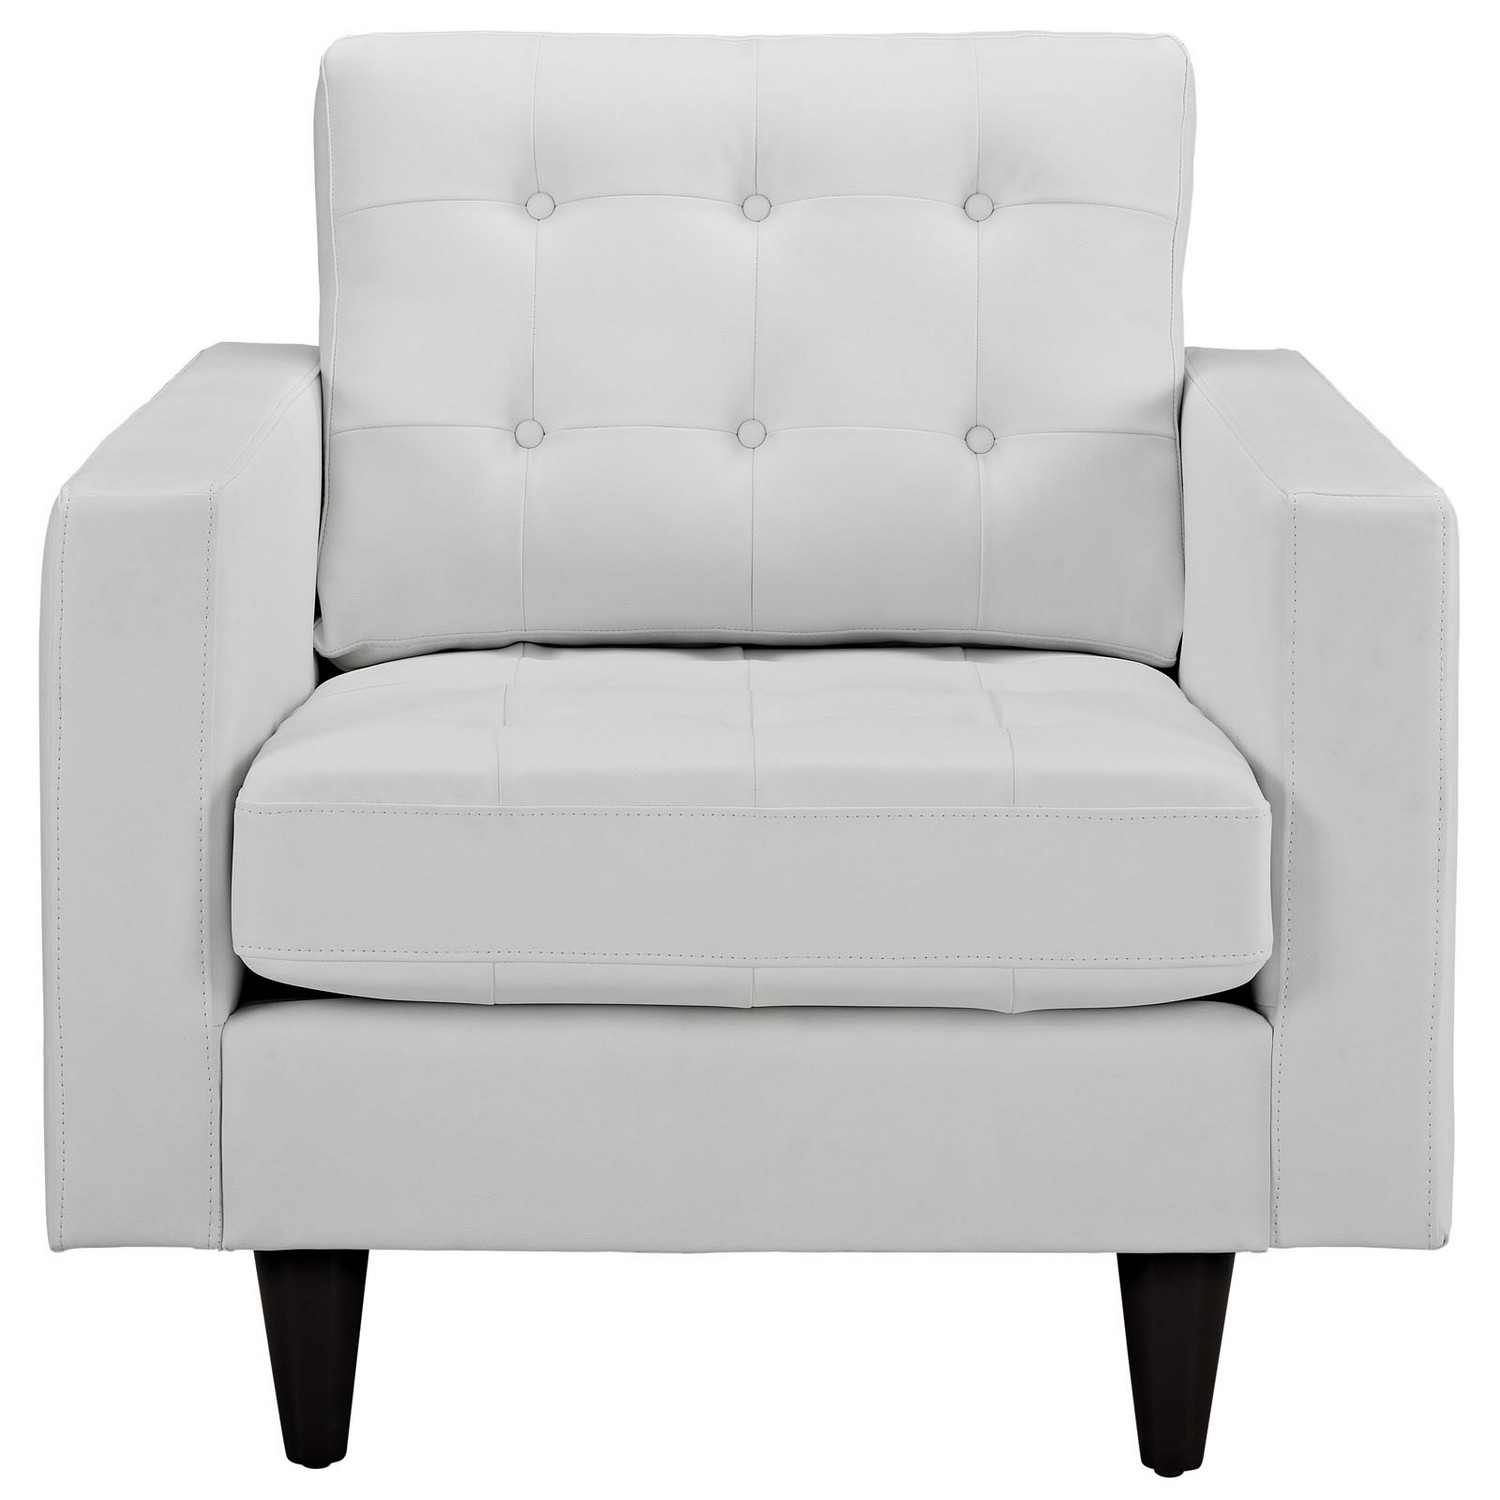 Modway Empress Armchair Leather Set of 2 - White